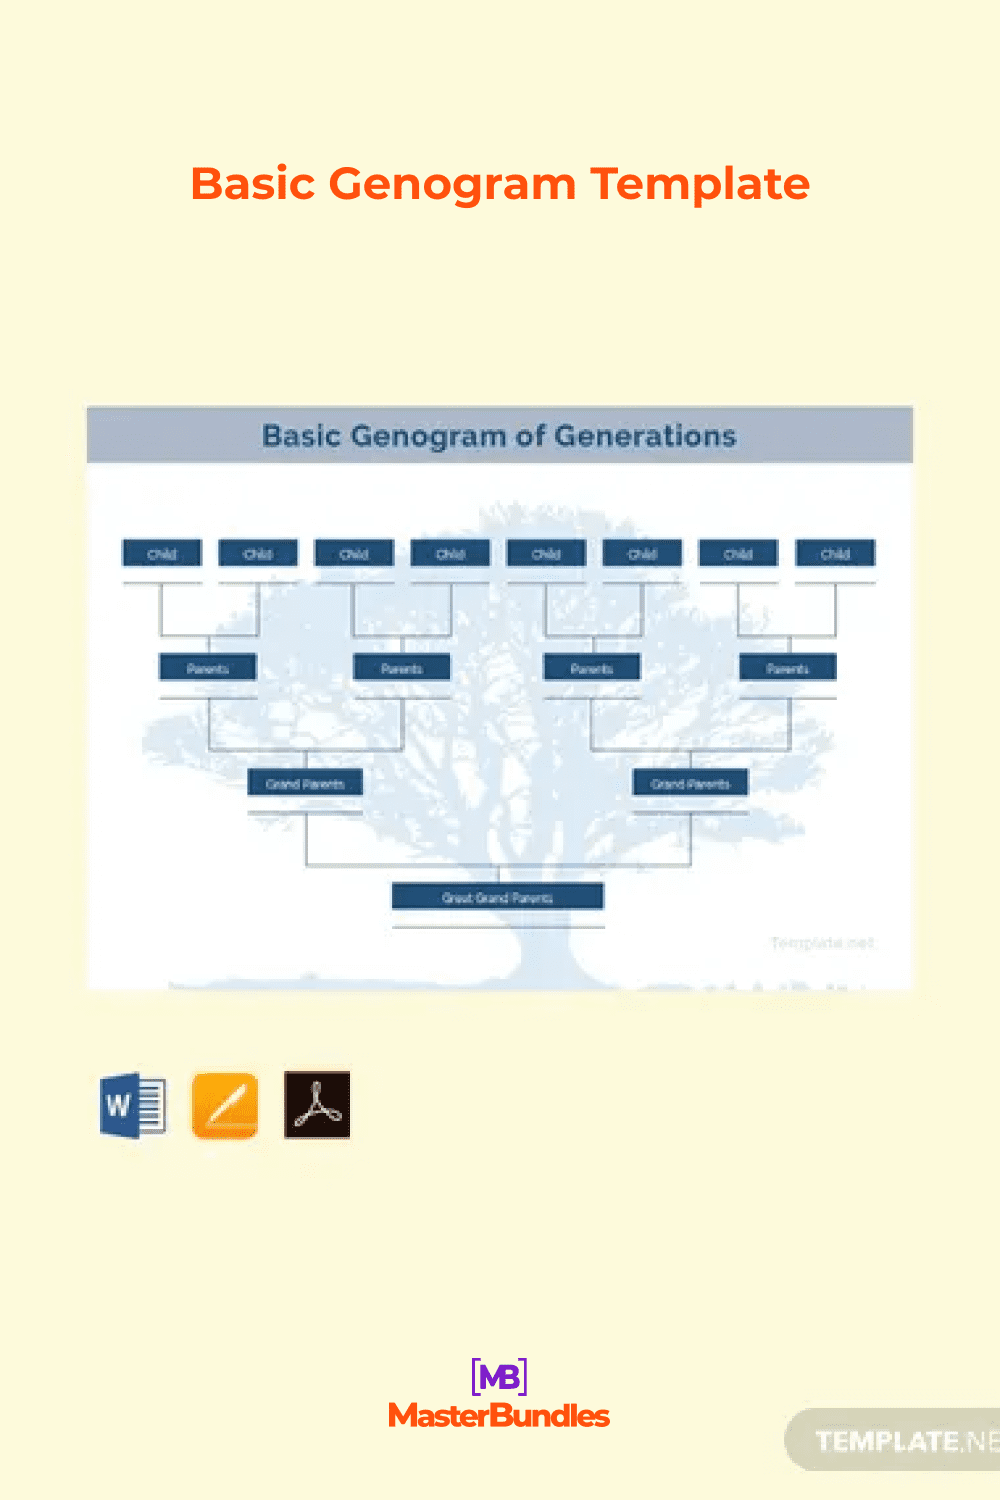 It is more a diagram of the family and its members in a certain generation.